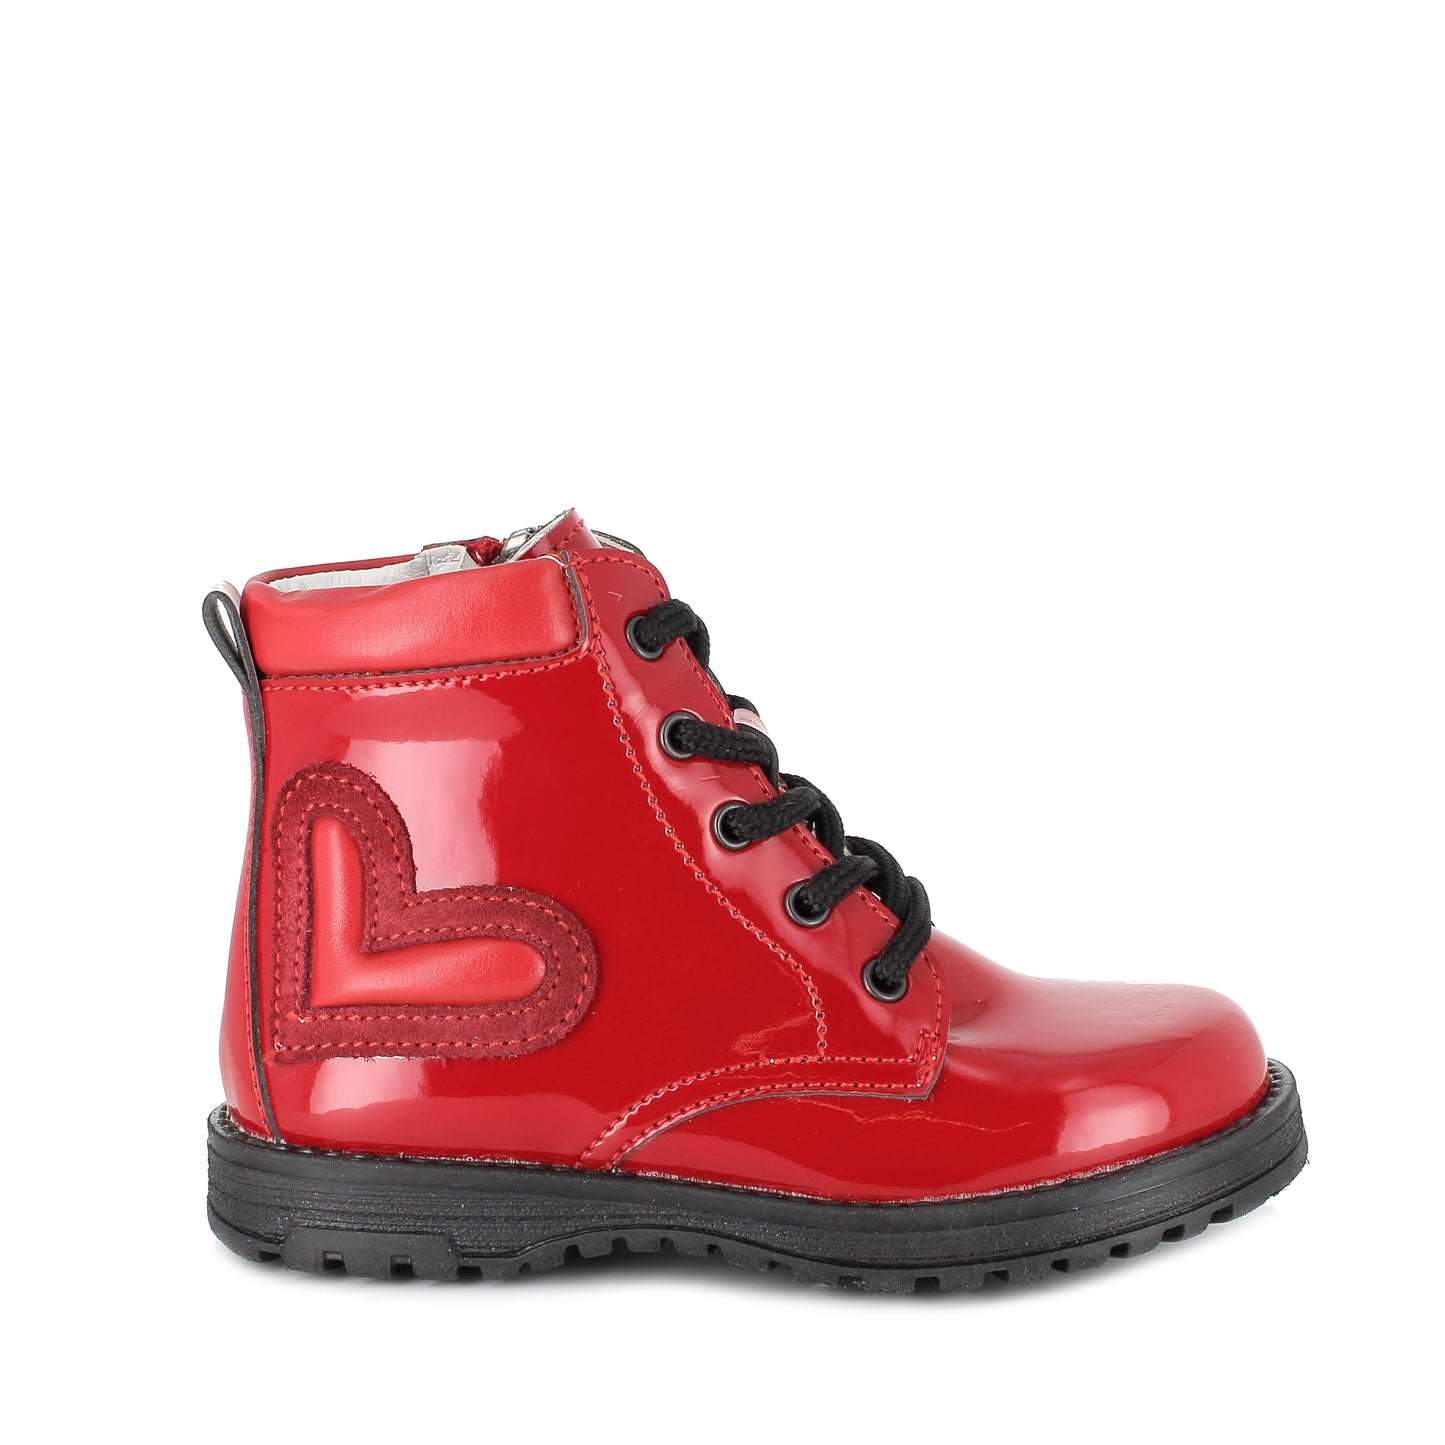 Primigi | 4912300 | Play Casual | Girls Lace/Zip Boot | Red Patent